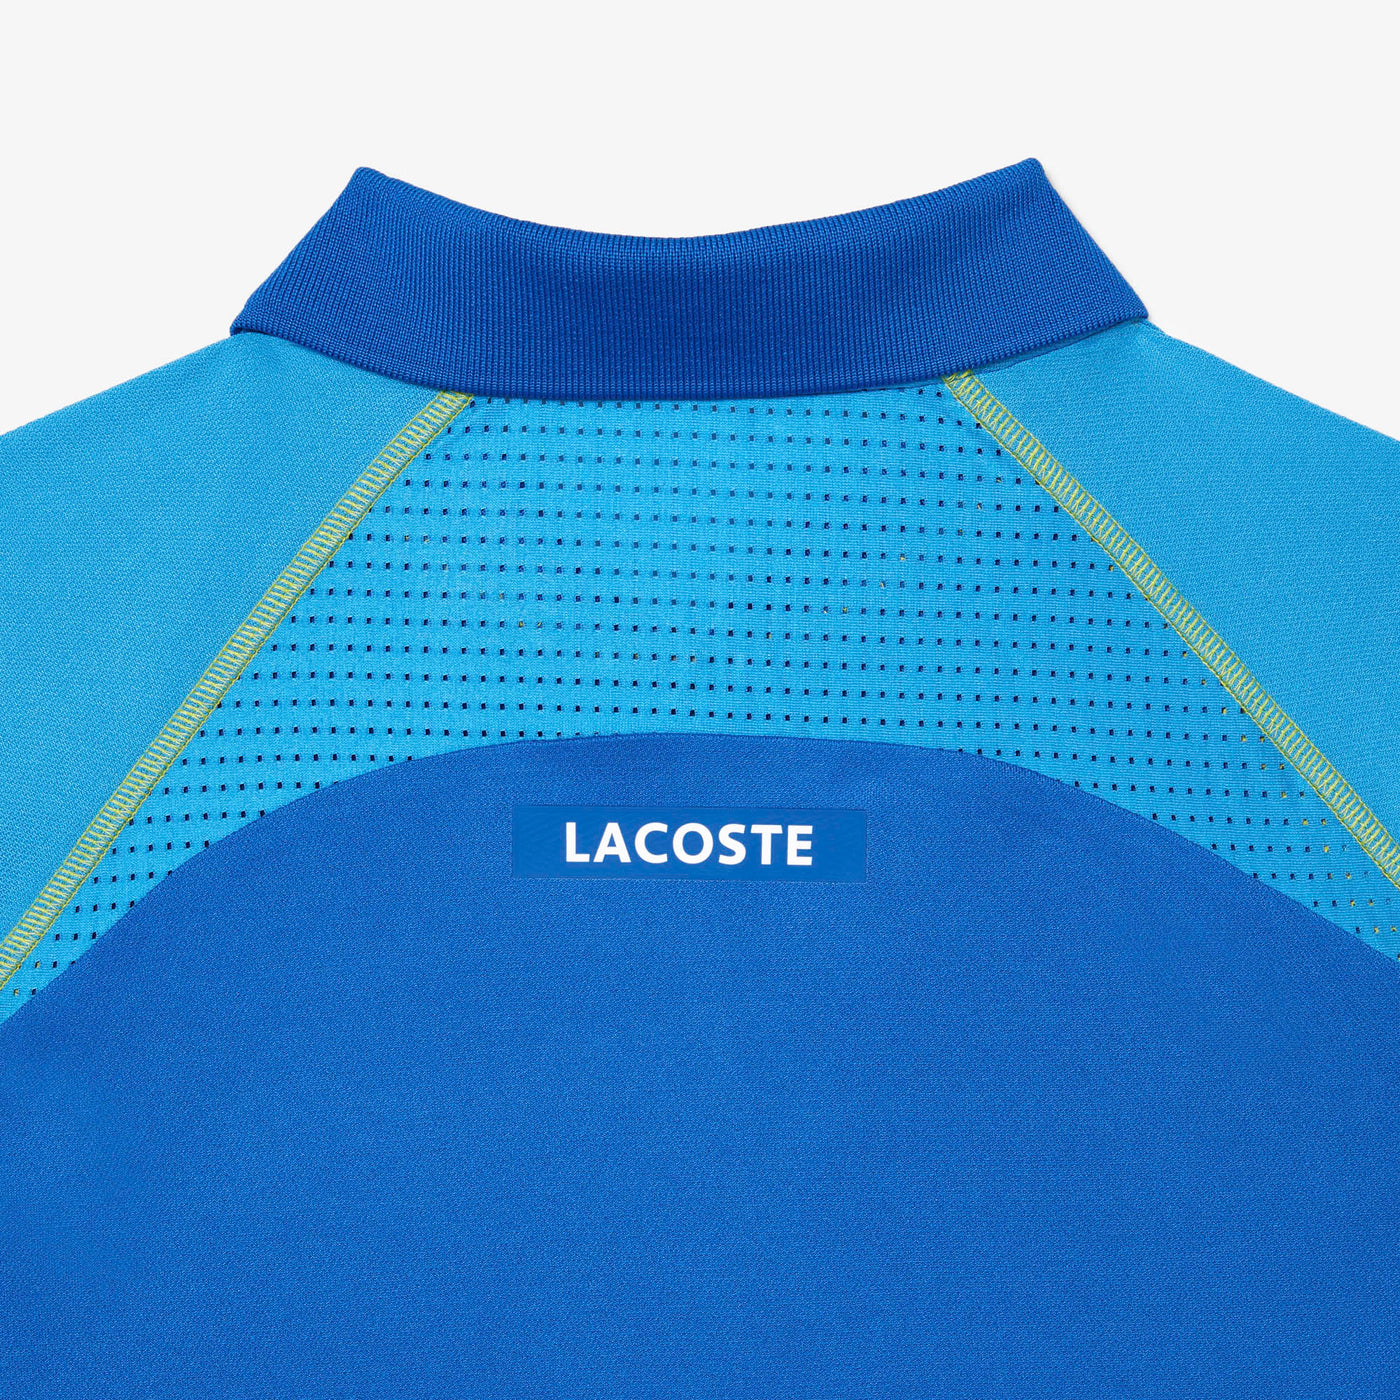 Men’S Lacoste Tennis Recycled Polyester Polo Shirt With Ultra-Dry Technology - Dh5046